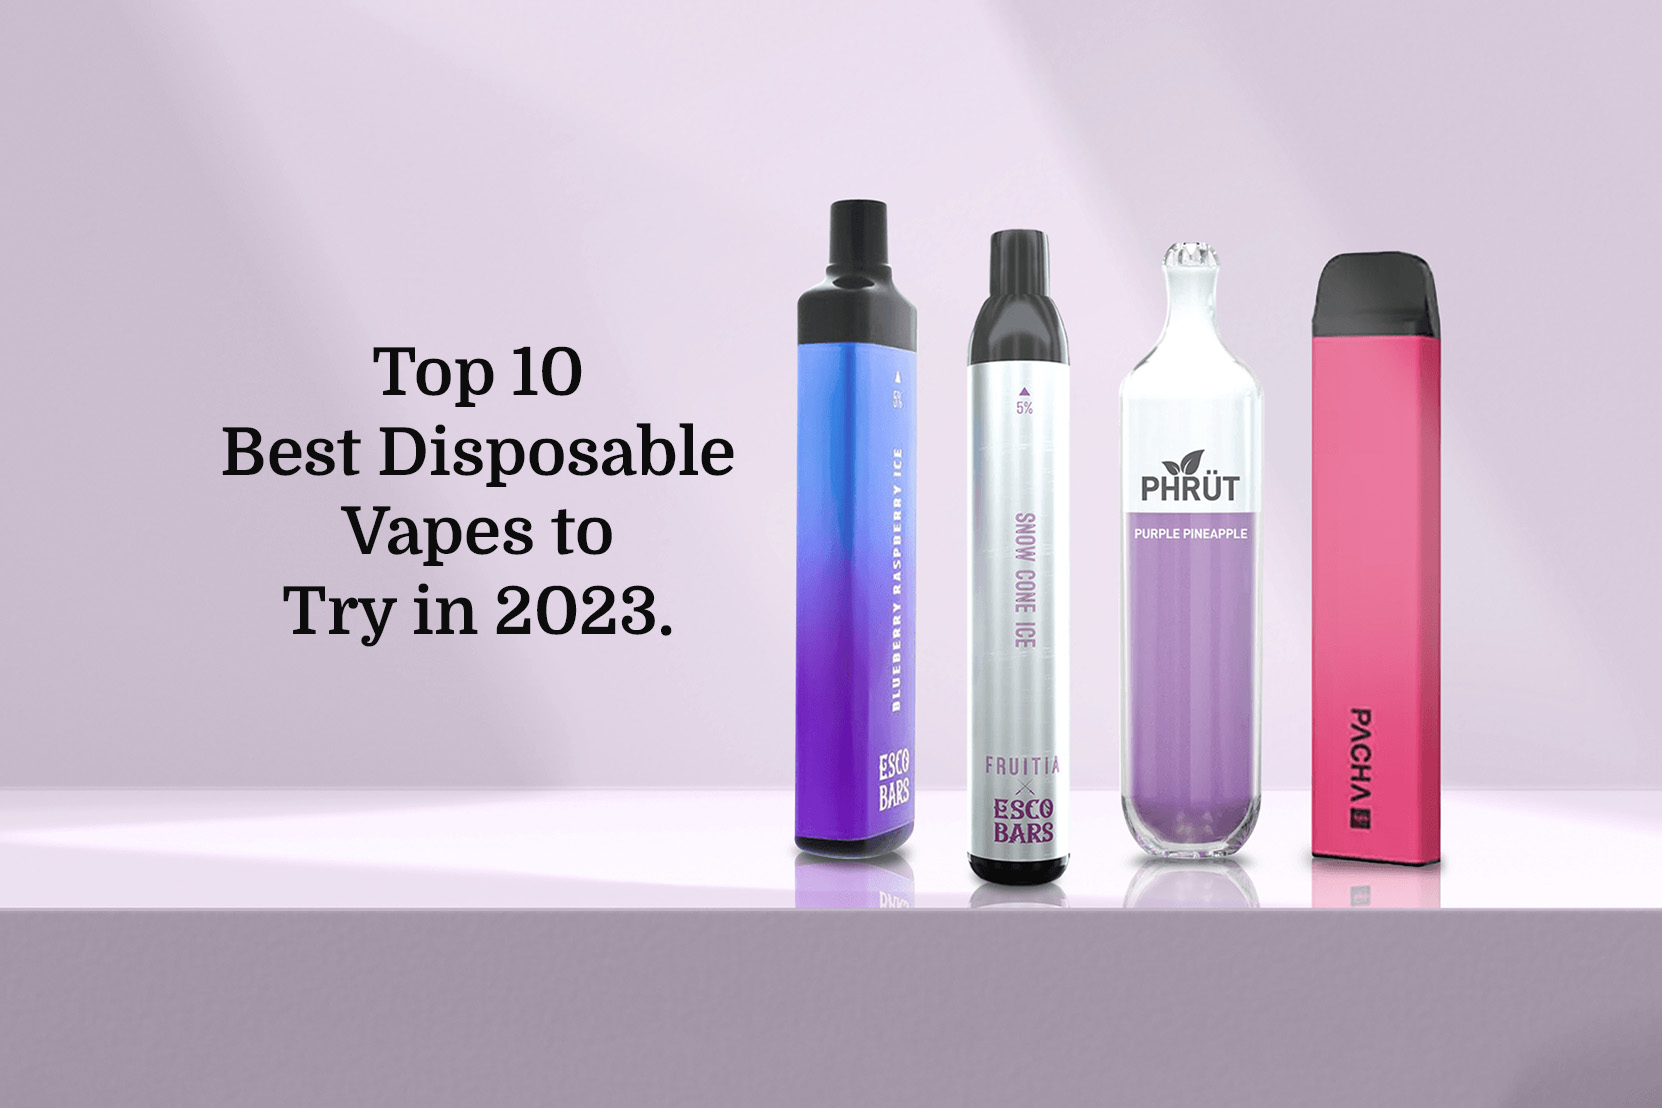 Guide to the Top 10 best Disposable Vapes